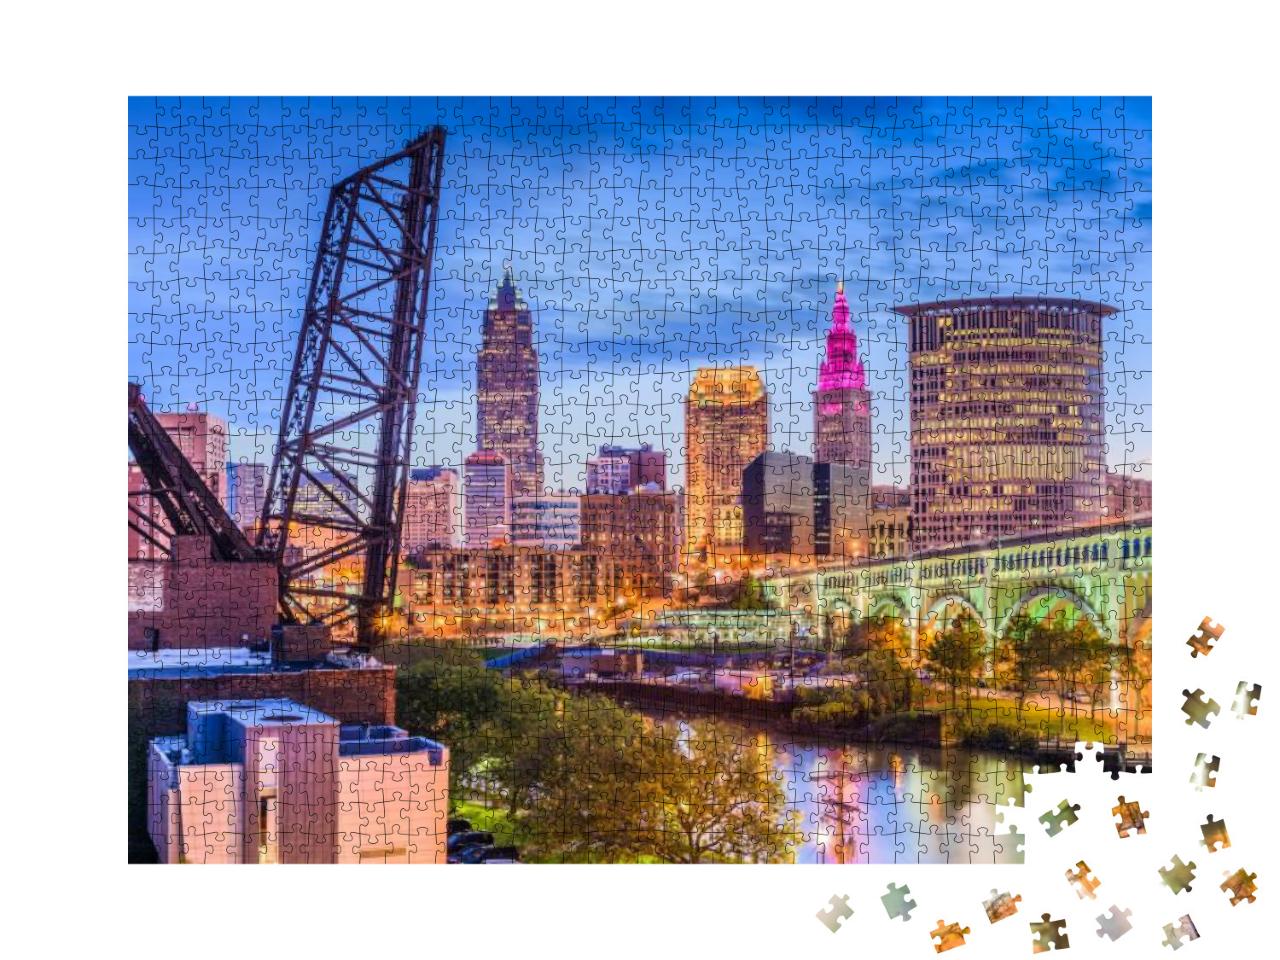 Cleveland, Ohio, USA Downtown Skyline on the River... Jigsaw Puzzle with 1000 pieces